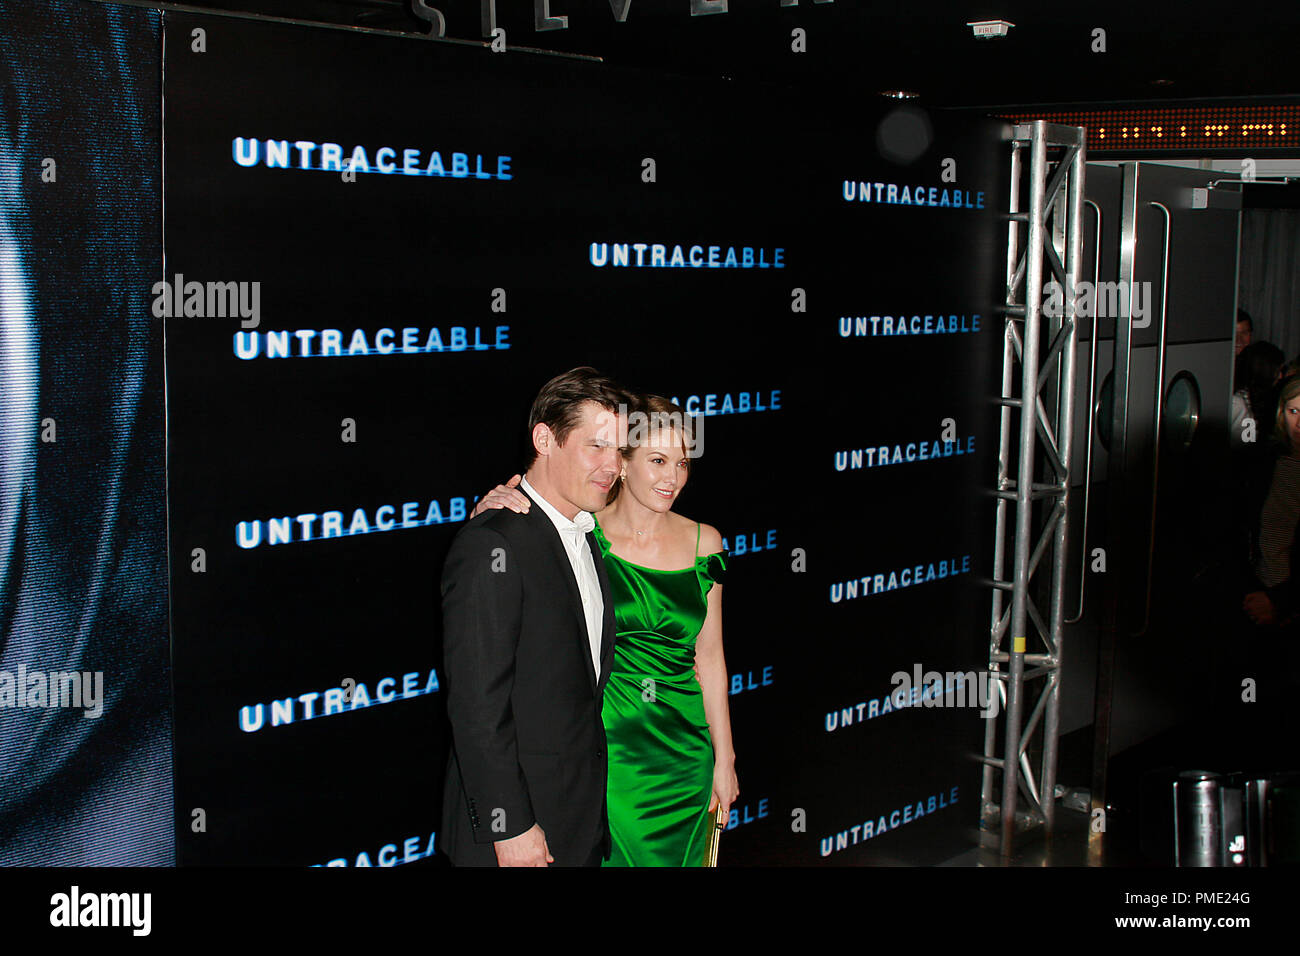 Untraceable Premiere Diane Lane, Josh Brolin  1-22-2008 / Silver Screen Theater at the Pacific Design Center / West Hollywood, CA / Screen Gems / Photo by Joseph Martinez File Reference # 23336 0037JM   For Editorial Use Only - Stock Photo